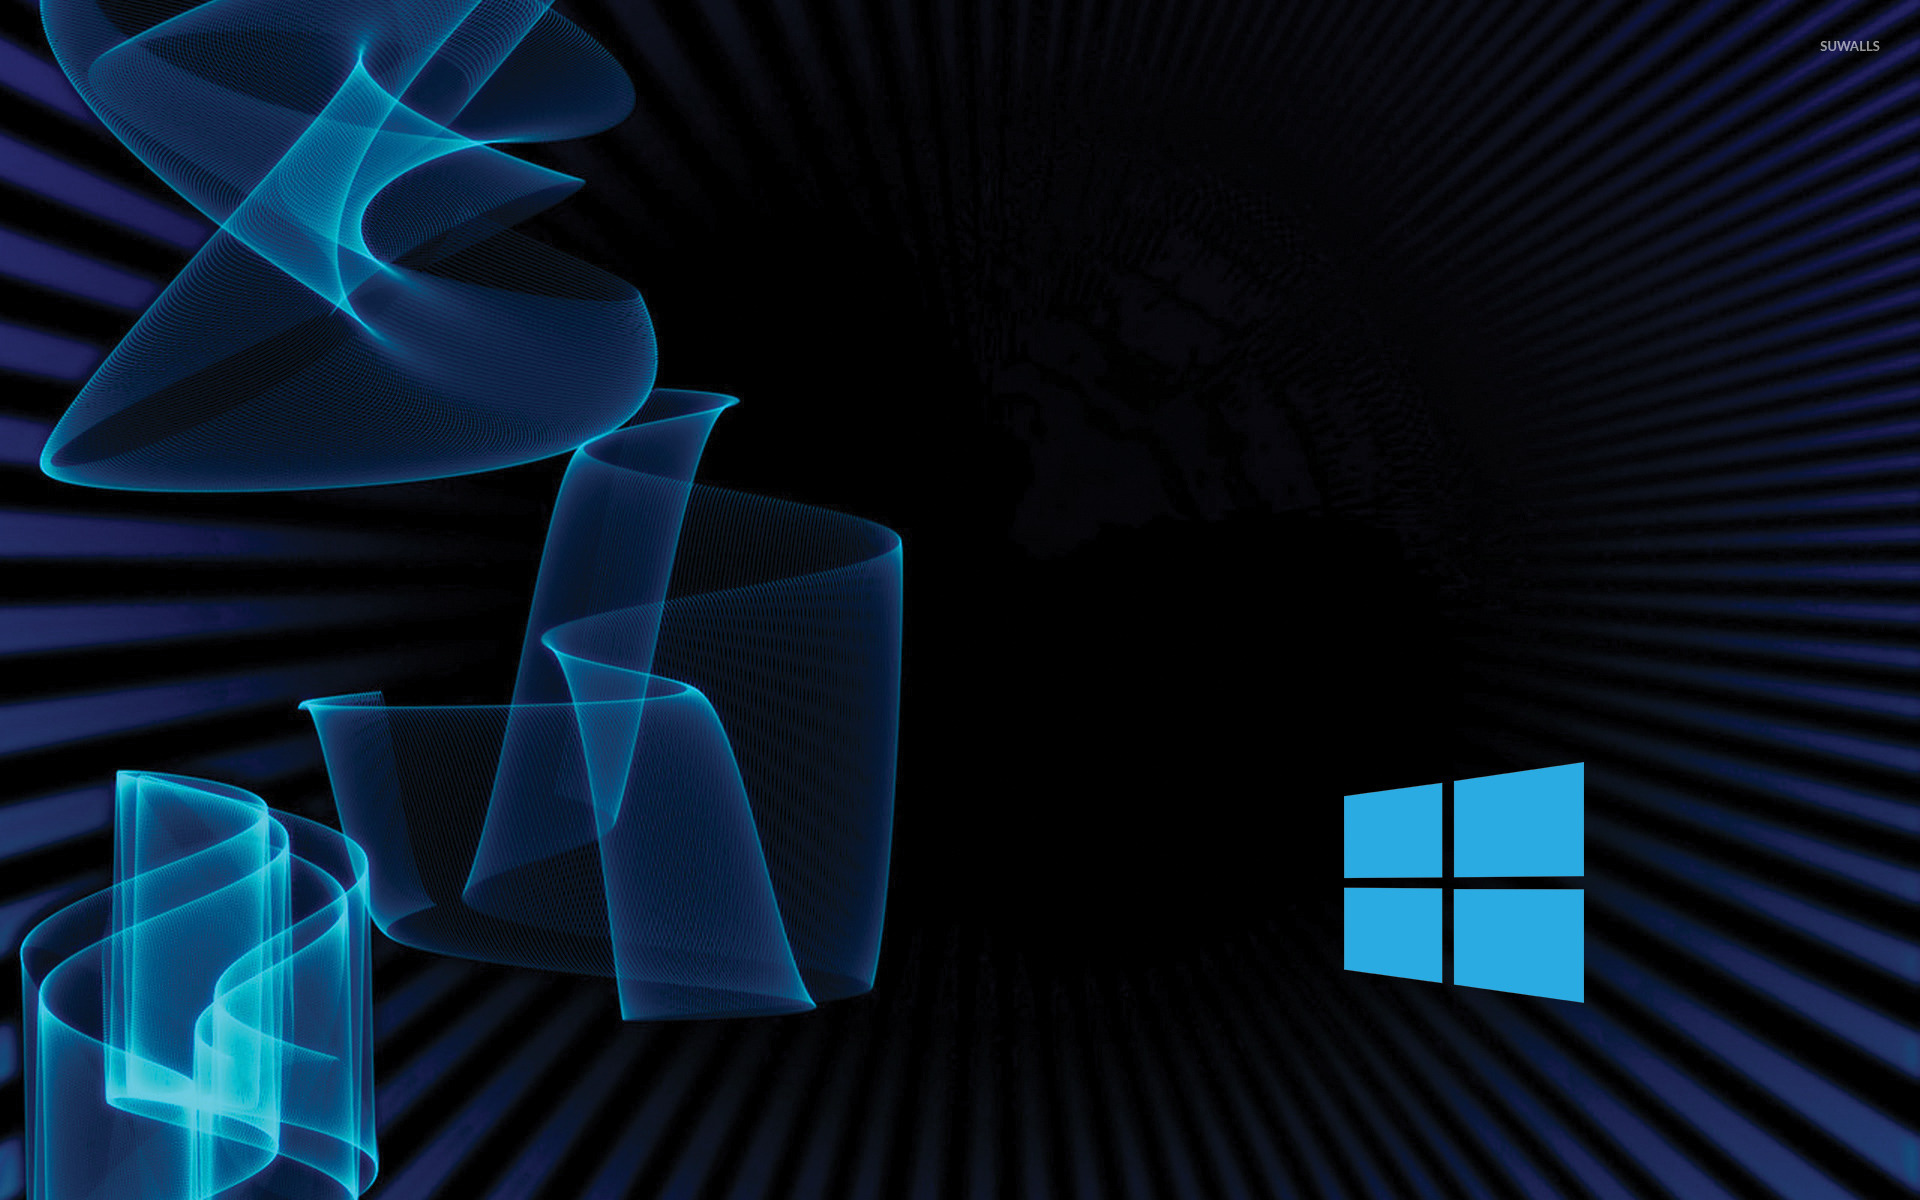 Windows 10 Simple Blue Logo On Blue Rays And Waves Wallpaper Computer Wallpapers